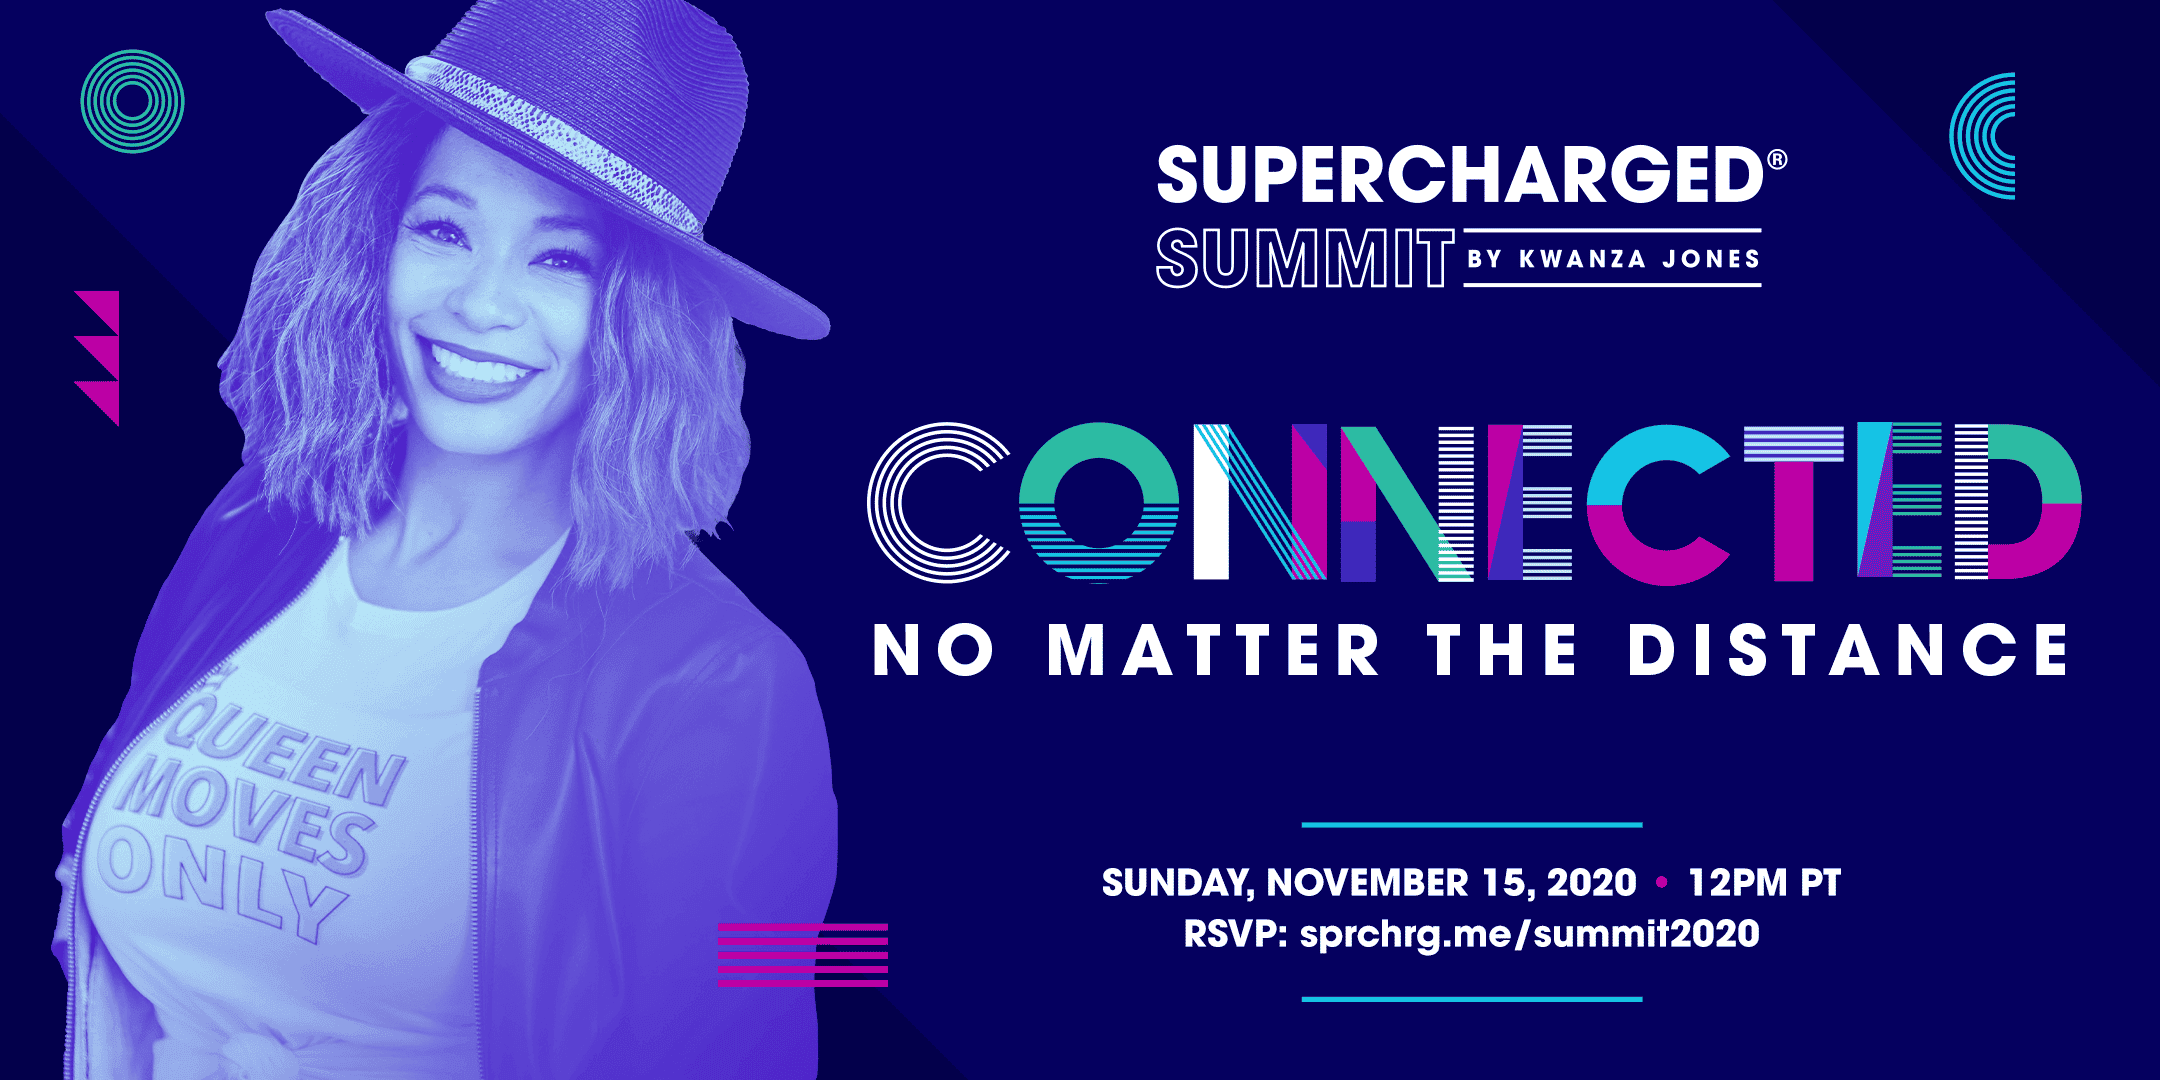 supercharged summit 2020